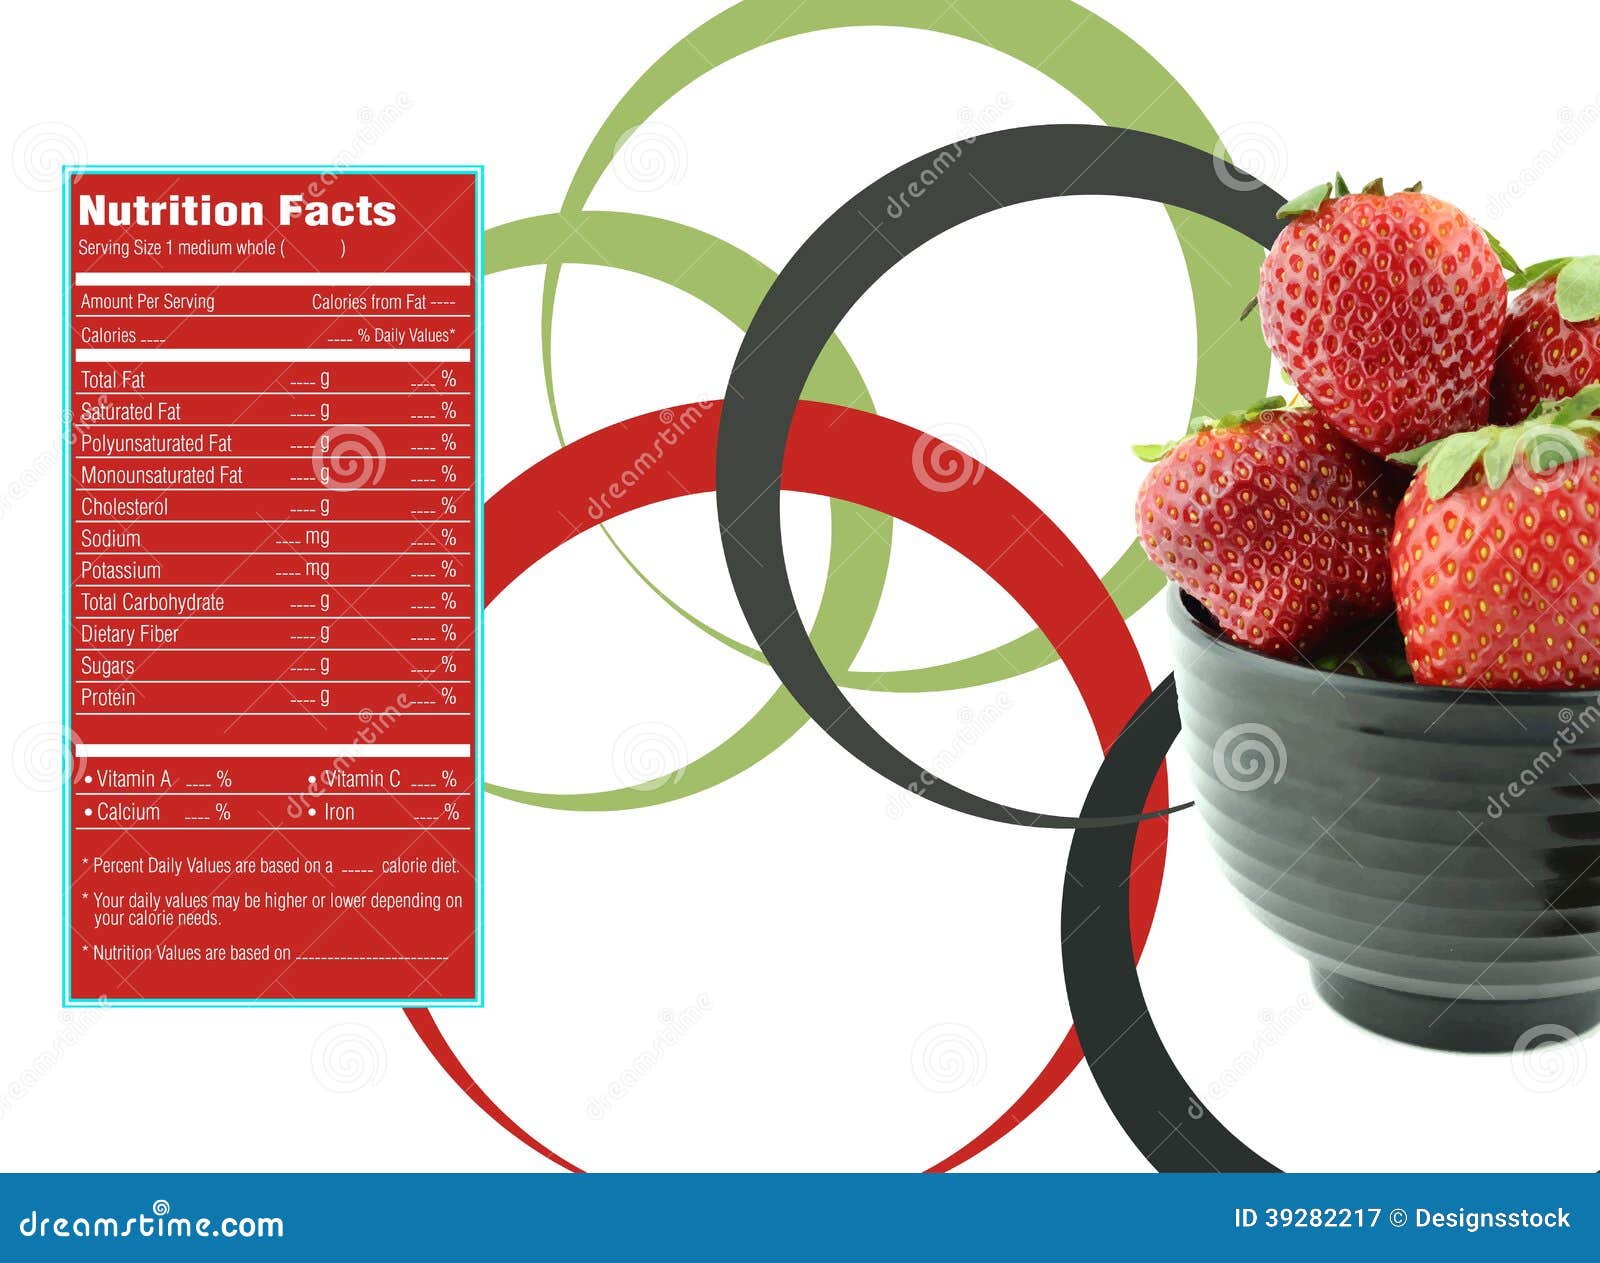 Strawberries Nutrition Facts Stock Vector Image 39282217 within nutrition facts strawberries for House